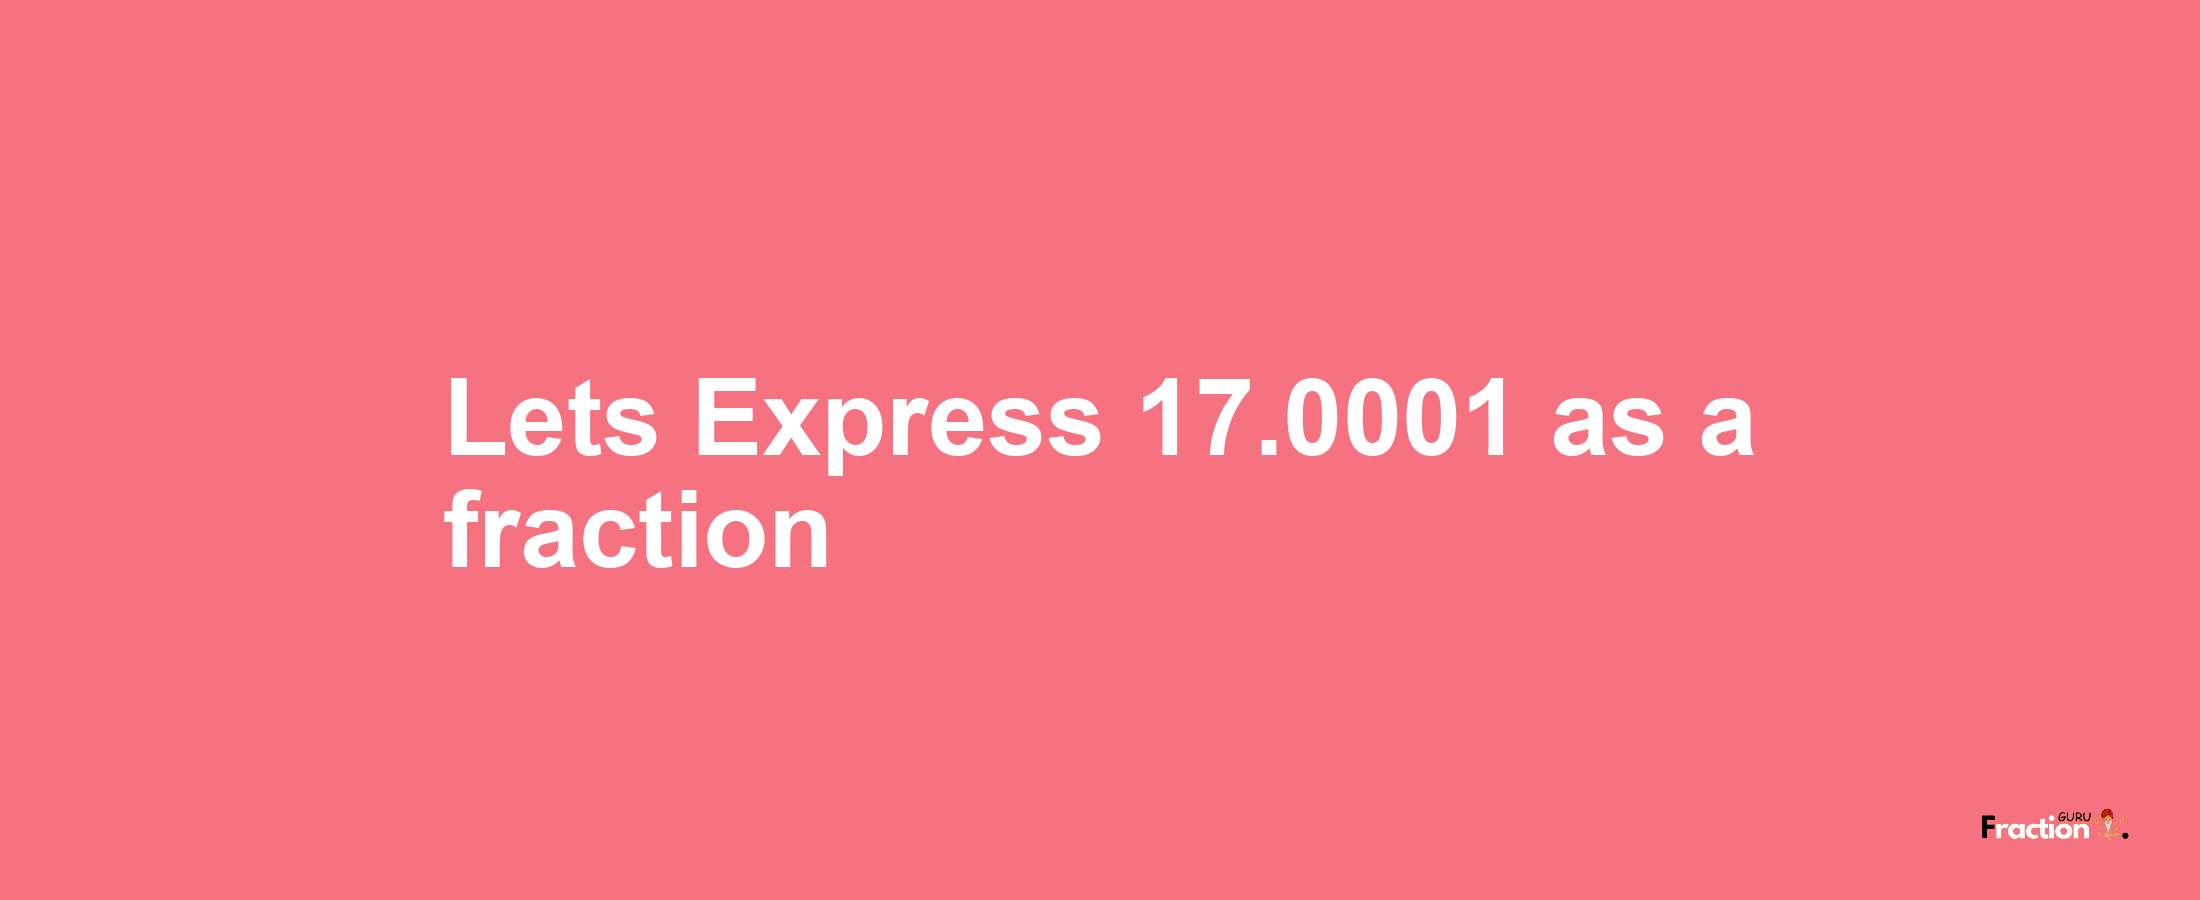 Lets Express 17.0001 as afraction